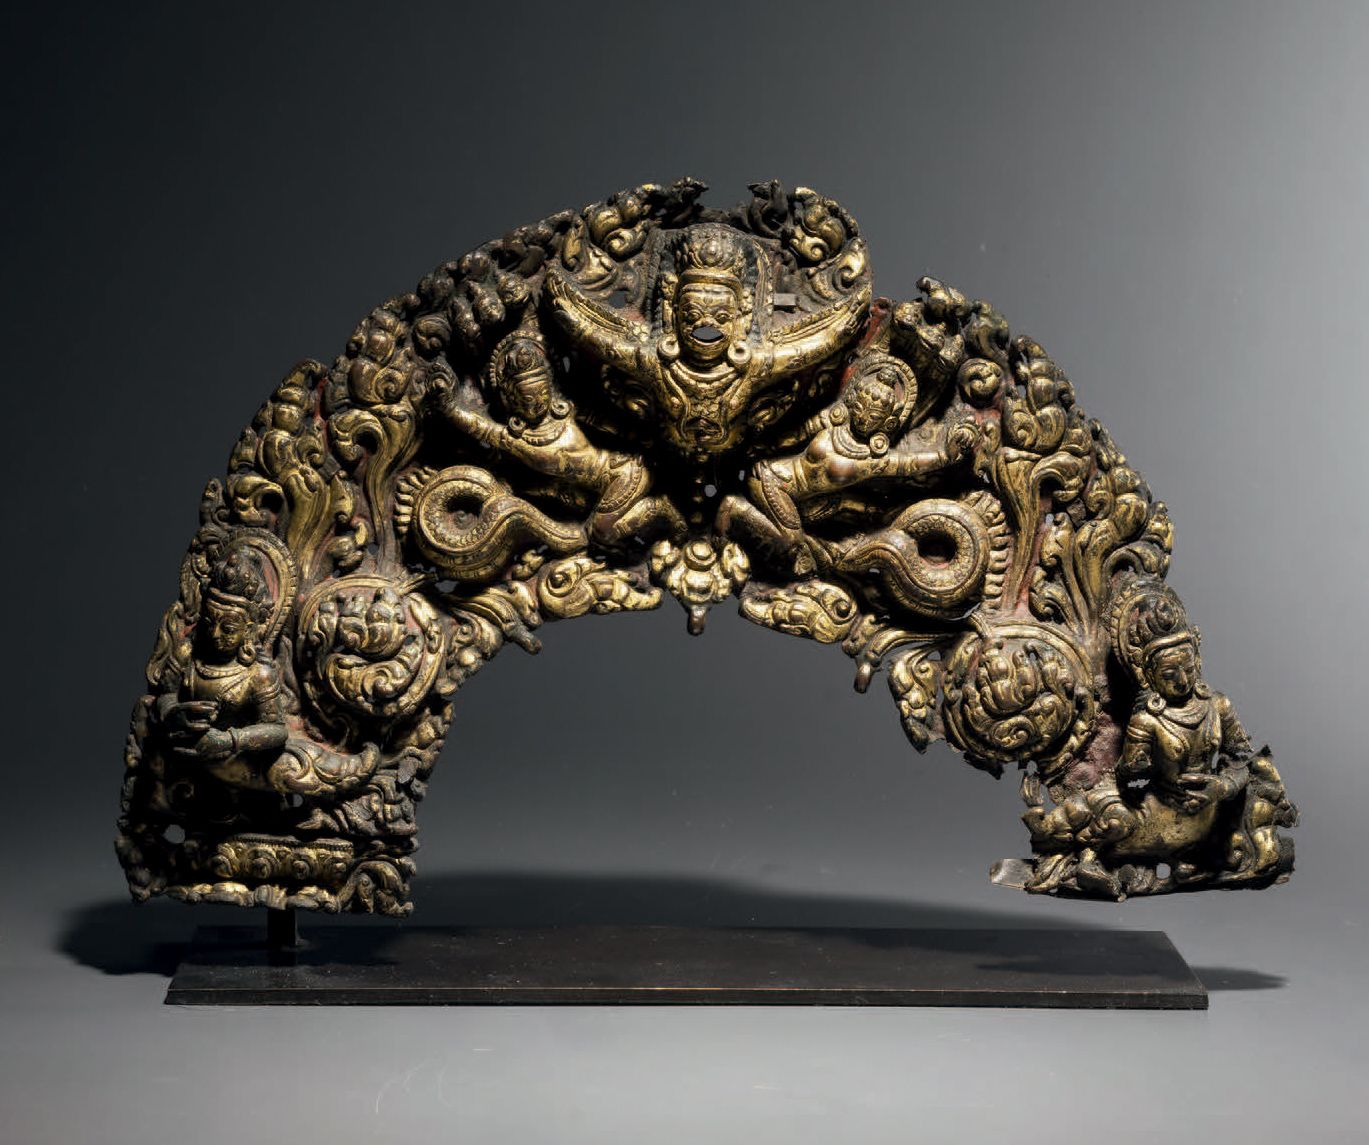 Null Torana, Nepal, c. 15th century L. 19 cm. Embossed and gilded copper
A very &hellip;